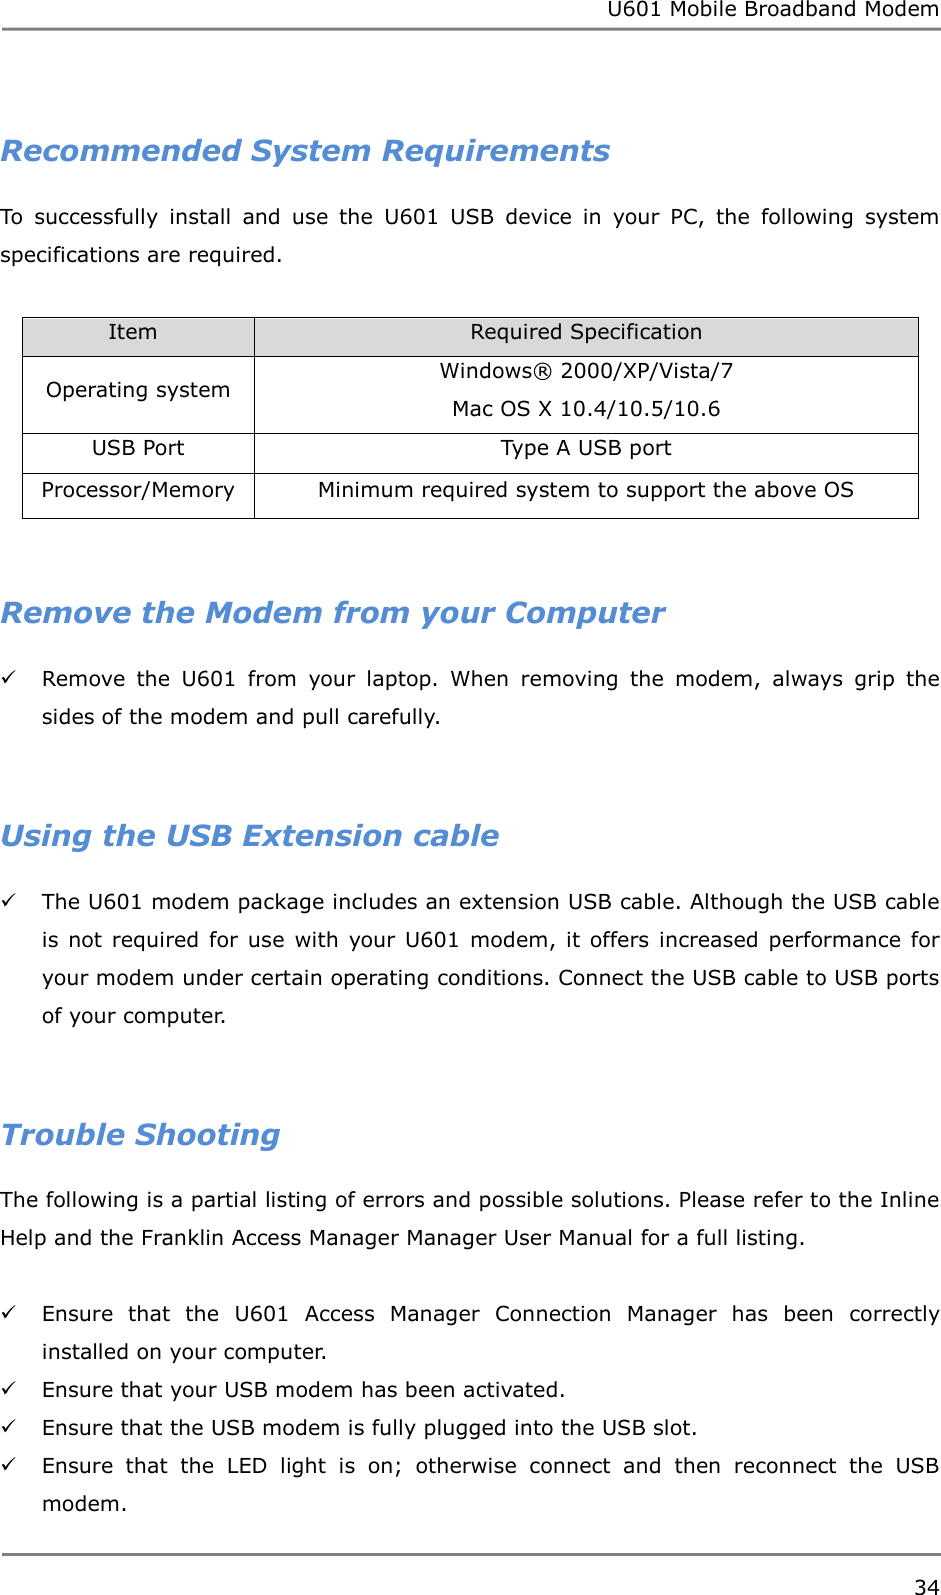 U601 Mobile Broadband Modem 34   Recommended System Requirements To  successfully  install  and  use  the  U601  USB  device  in  your  PC,  the  following  system specifications are required.  Item                           Required Specification Operating system Windows®  2000/XP/Vista/7 Mac OS X 10.4/10.5/10.6 USB Port Type A USB port Processor/Memory Minimum required system to support the above OS   Remove the Modem from your Computer  Remove  the  U601  from  your  laptop.  When  removing  the  modem,  always  grip  the sides of the modem and pull carefully.   Using the USB Extension cable  The U601 modem package includes an extension USB cable. Although the USB cable is  not  required for use  with  your U601  modem, it  offers  increased performance  for your modem under certain operating conditions. Connect the USB cable to USB ports of your computer.   Trouble Shooting The following is a partial listing of errors and possible solutions. Please refer to the Inline Help and the Franklin Access Manager Manager User Manual for a full listing.   Ensure  that  the  U601  Access  Manager  Connection  Manager  has  been  correctly installed on your computer.  Ensure that your USB modem has been activated.  Ensure that the USB modem is fully plugged into the USB slot.  Ensure  that  the  LED  light  is  on;  otherwise  connect  and  then  reconnect  the  USB modem. 